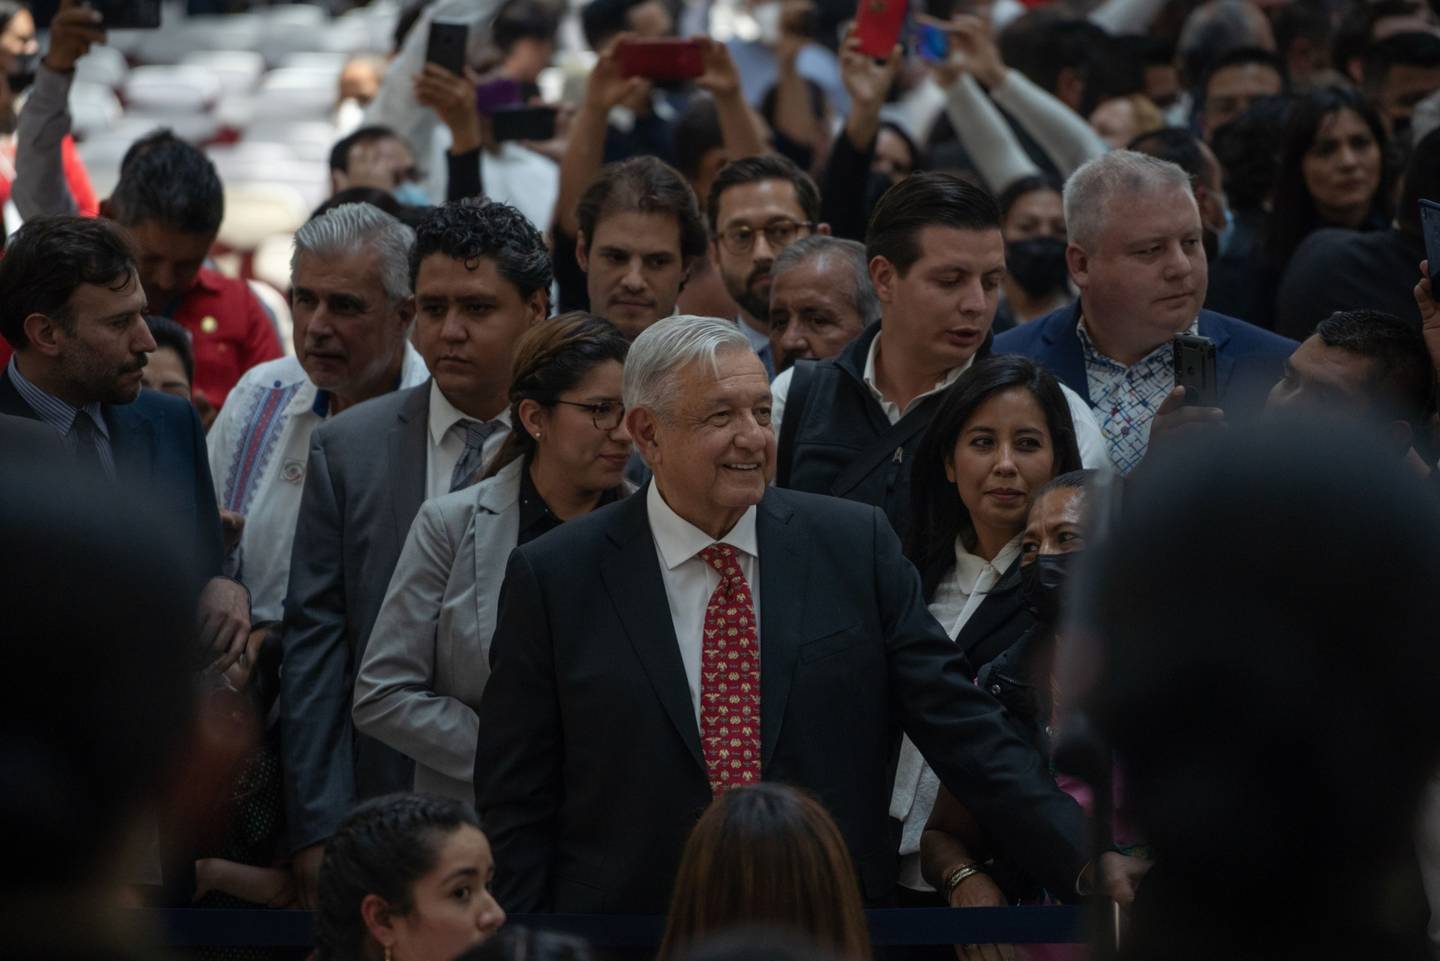 Since taking office, Andrés Manuel Lopez Obrador, known as AMLO, has systematically undermined changes that have improved Mexico's energy mix and markets.